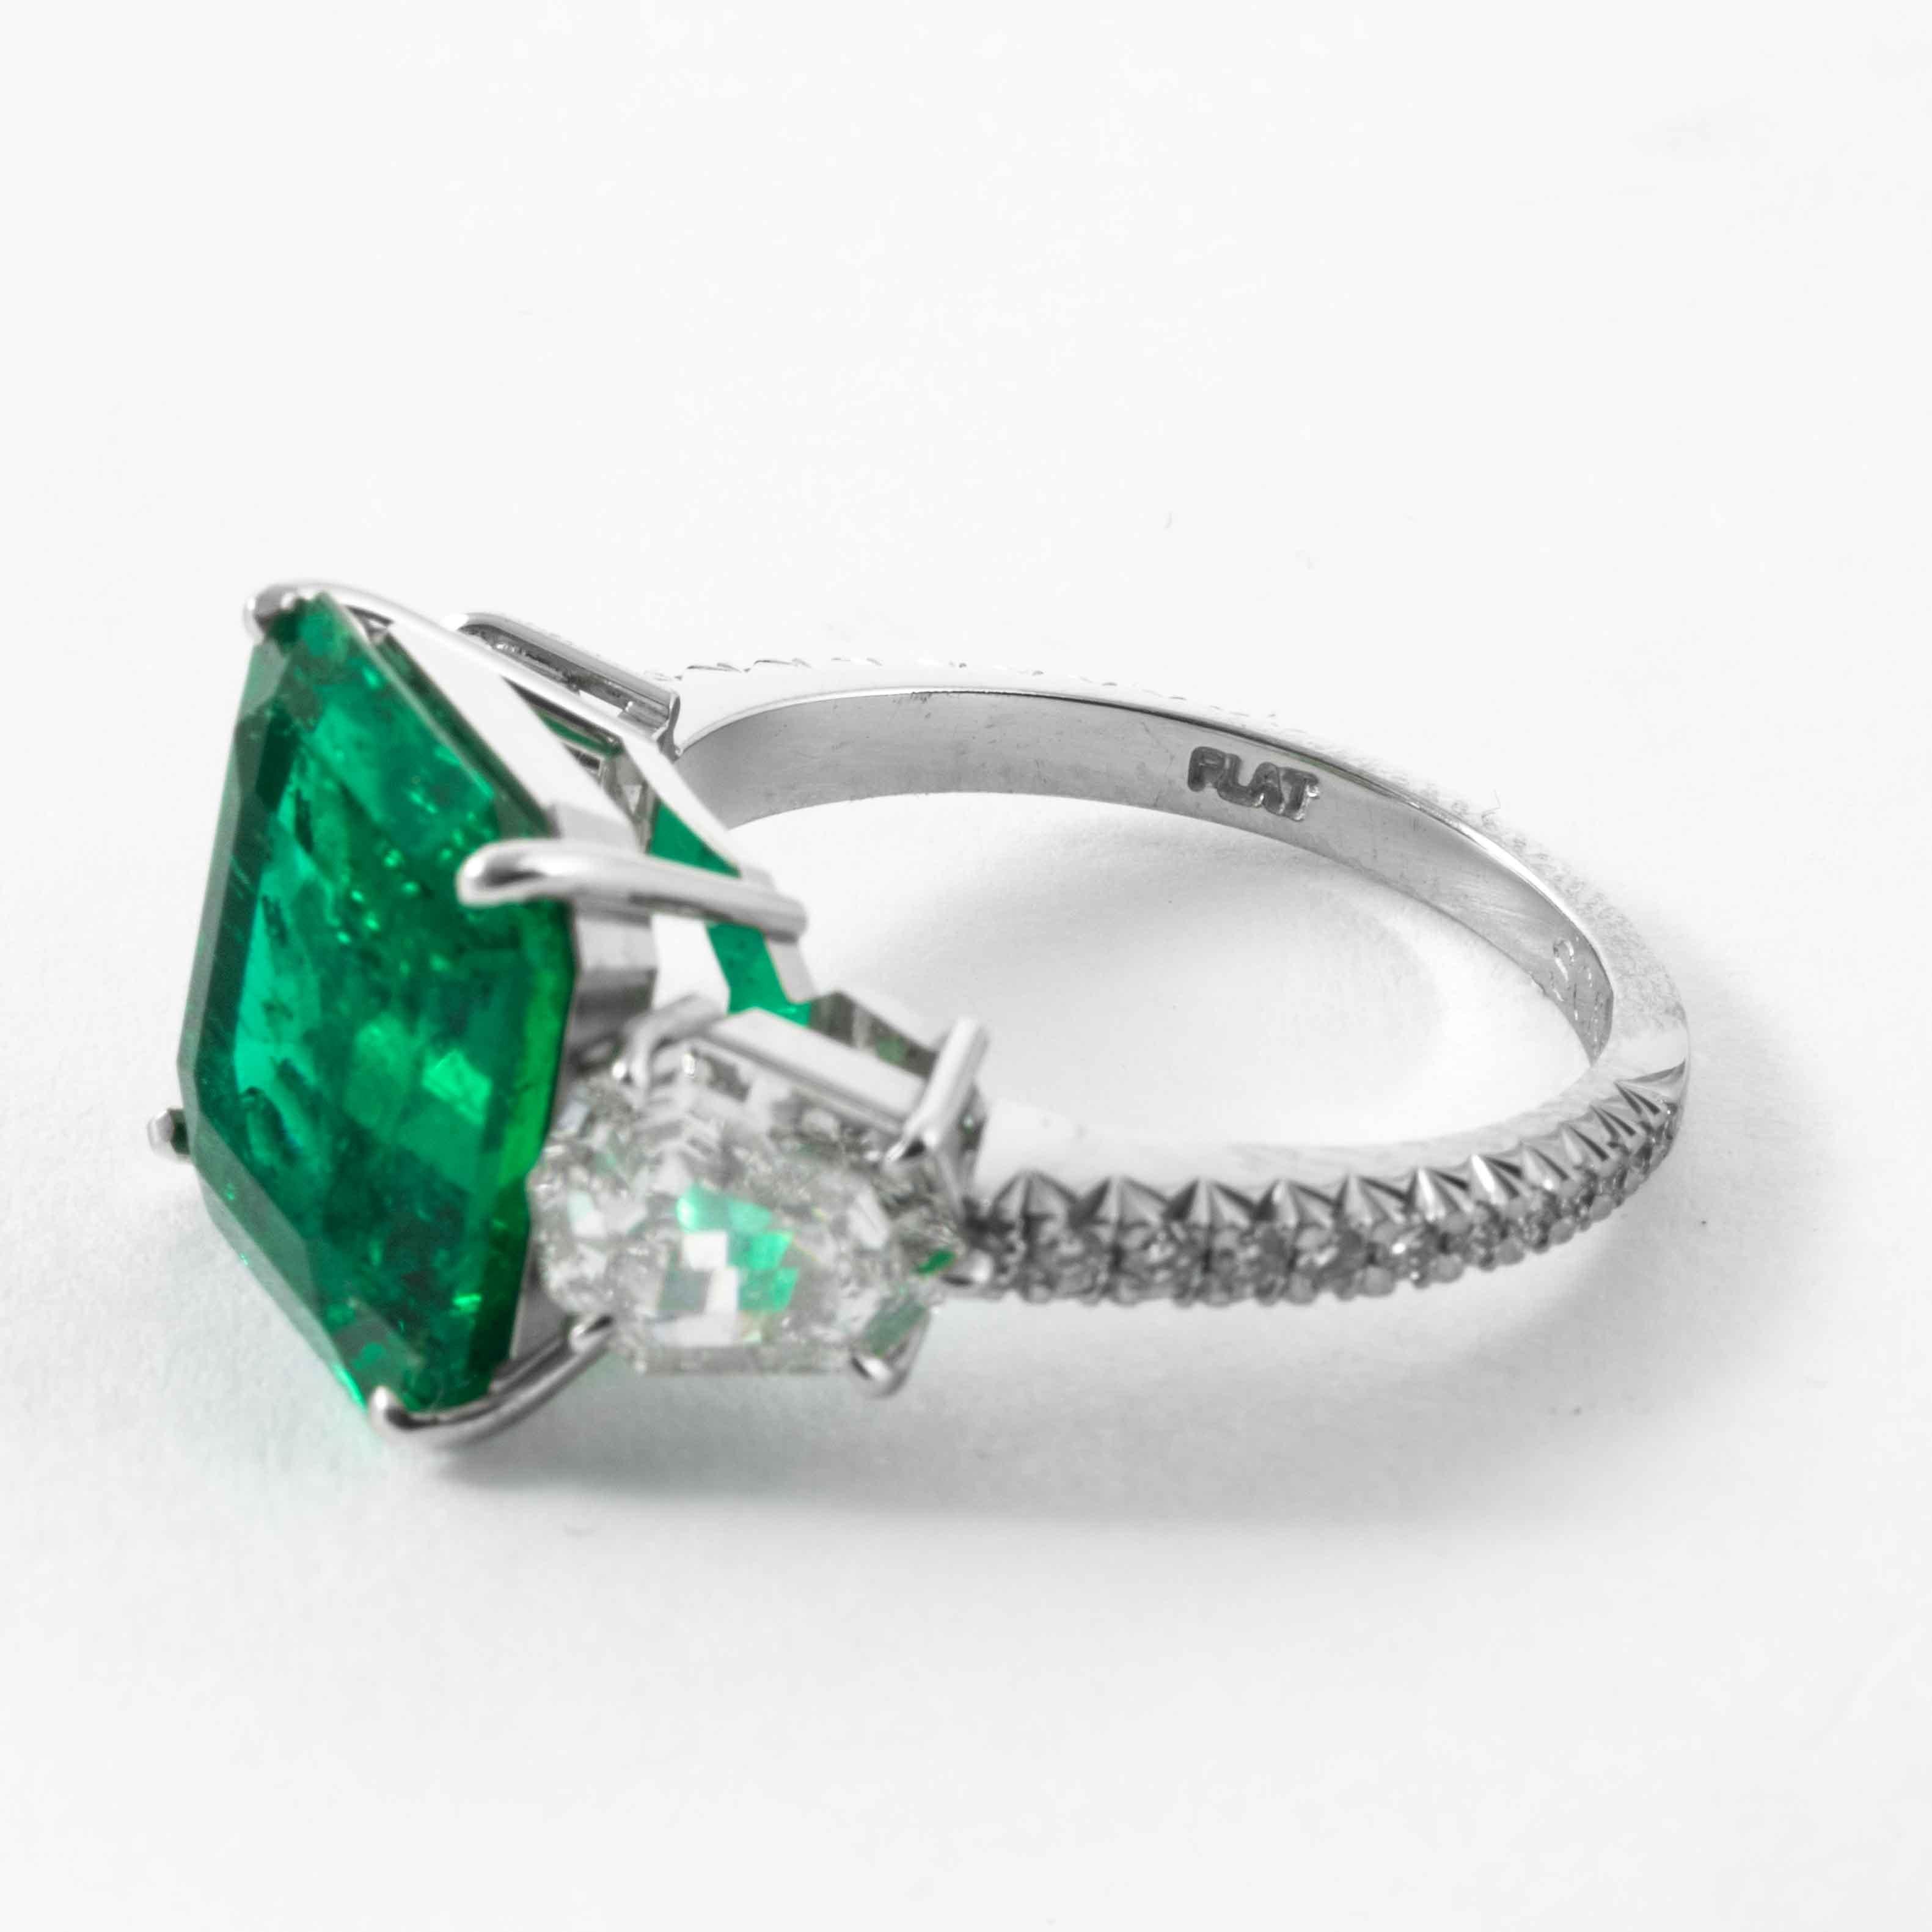 Shreve, Crump & Low 5.48 Carat Colombian Emerald and Diamond White Gold Ring For Sale 1